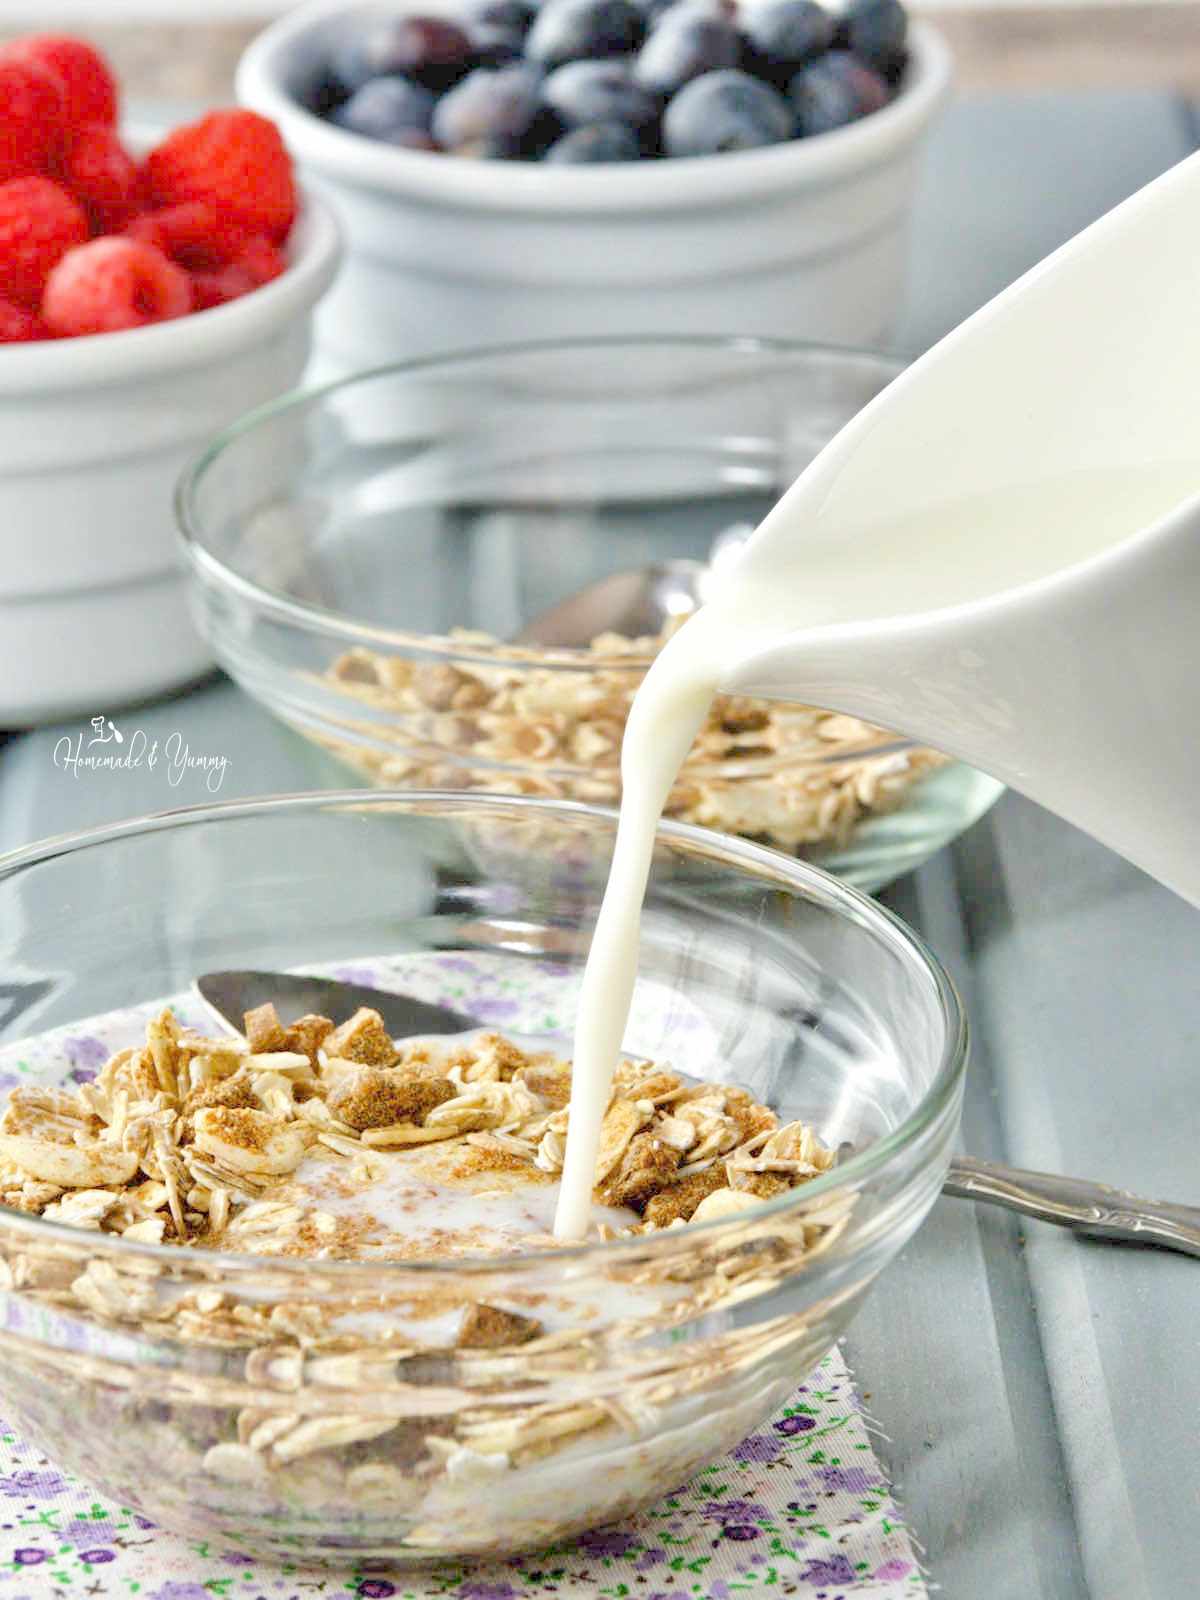 Pouring milk on muesli cereal.